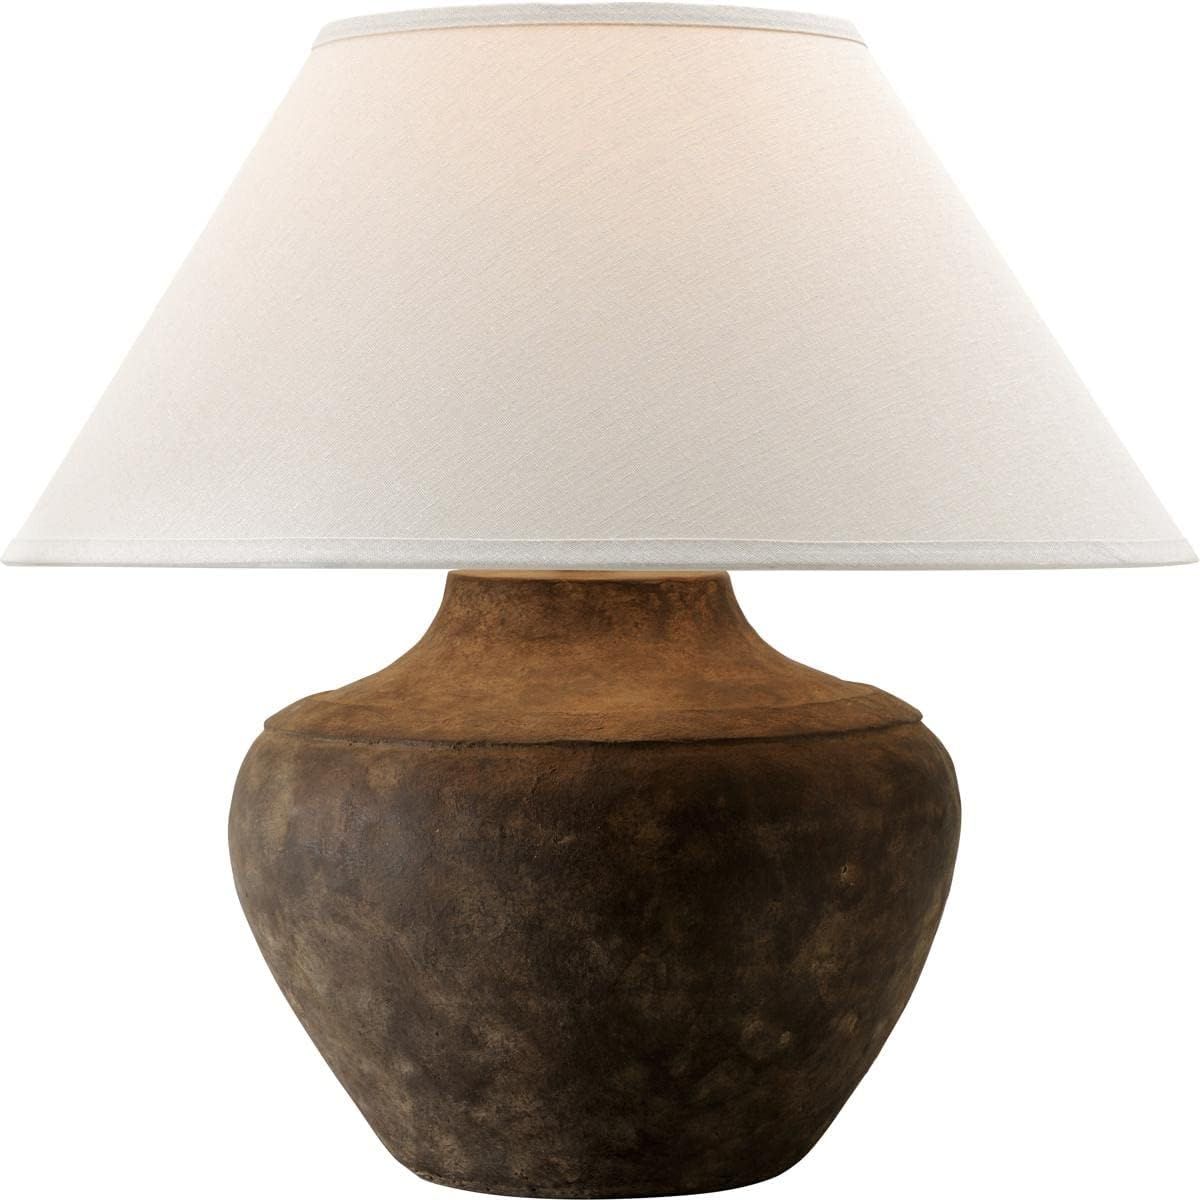 Troy Lighting PTL1010 Calabria - 20.5 Inch Table Lamp, | Amazon (US)